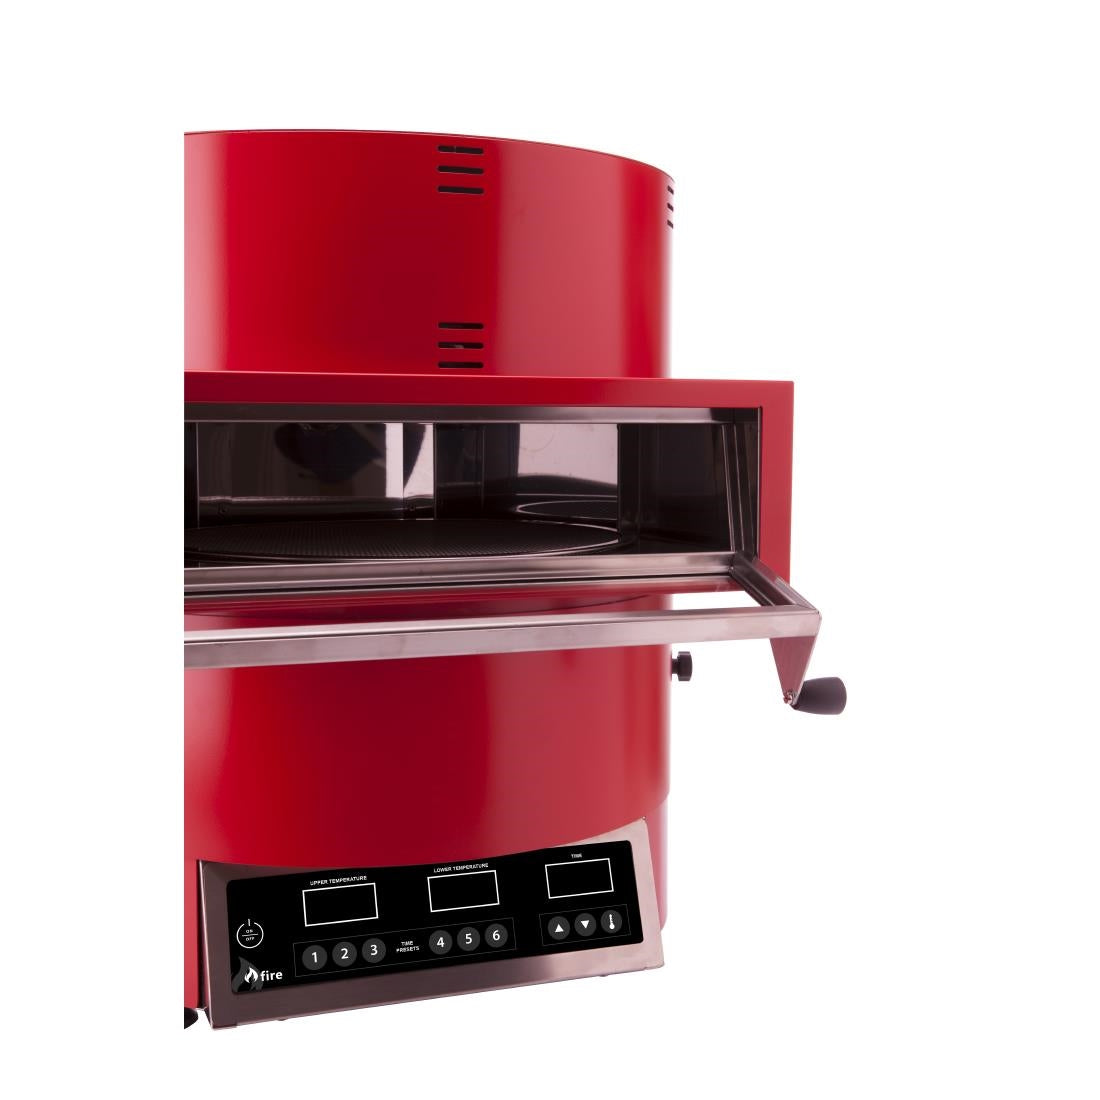 DB873-3PH Turbochef Fire Pizza Oven Three Phase JD Catering Equipment Solutions Ltd